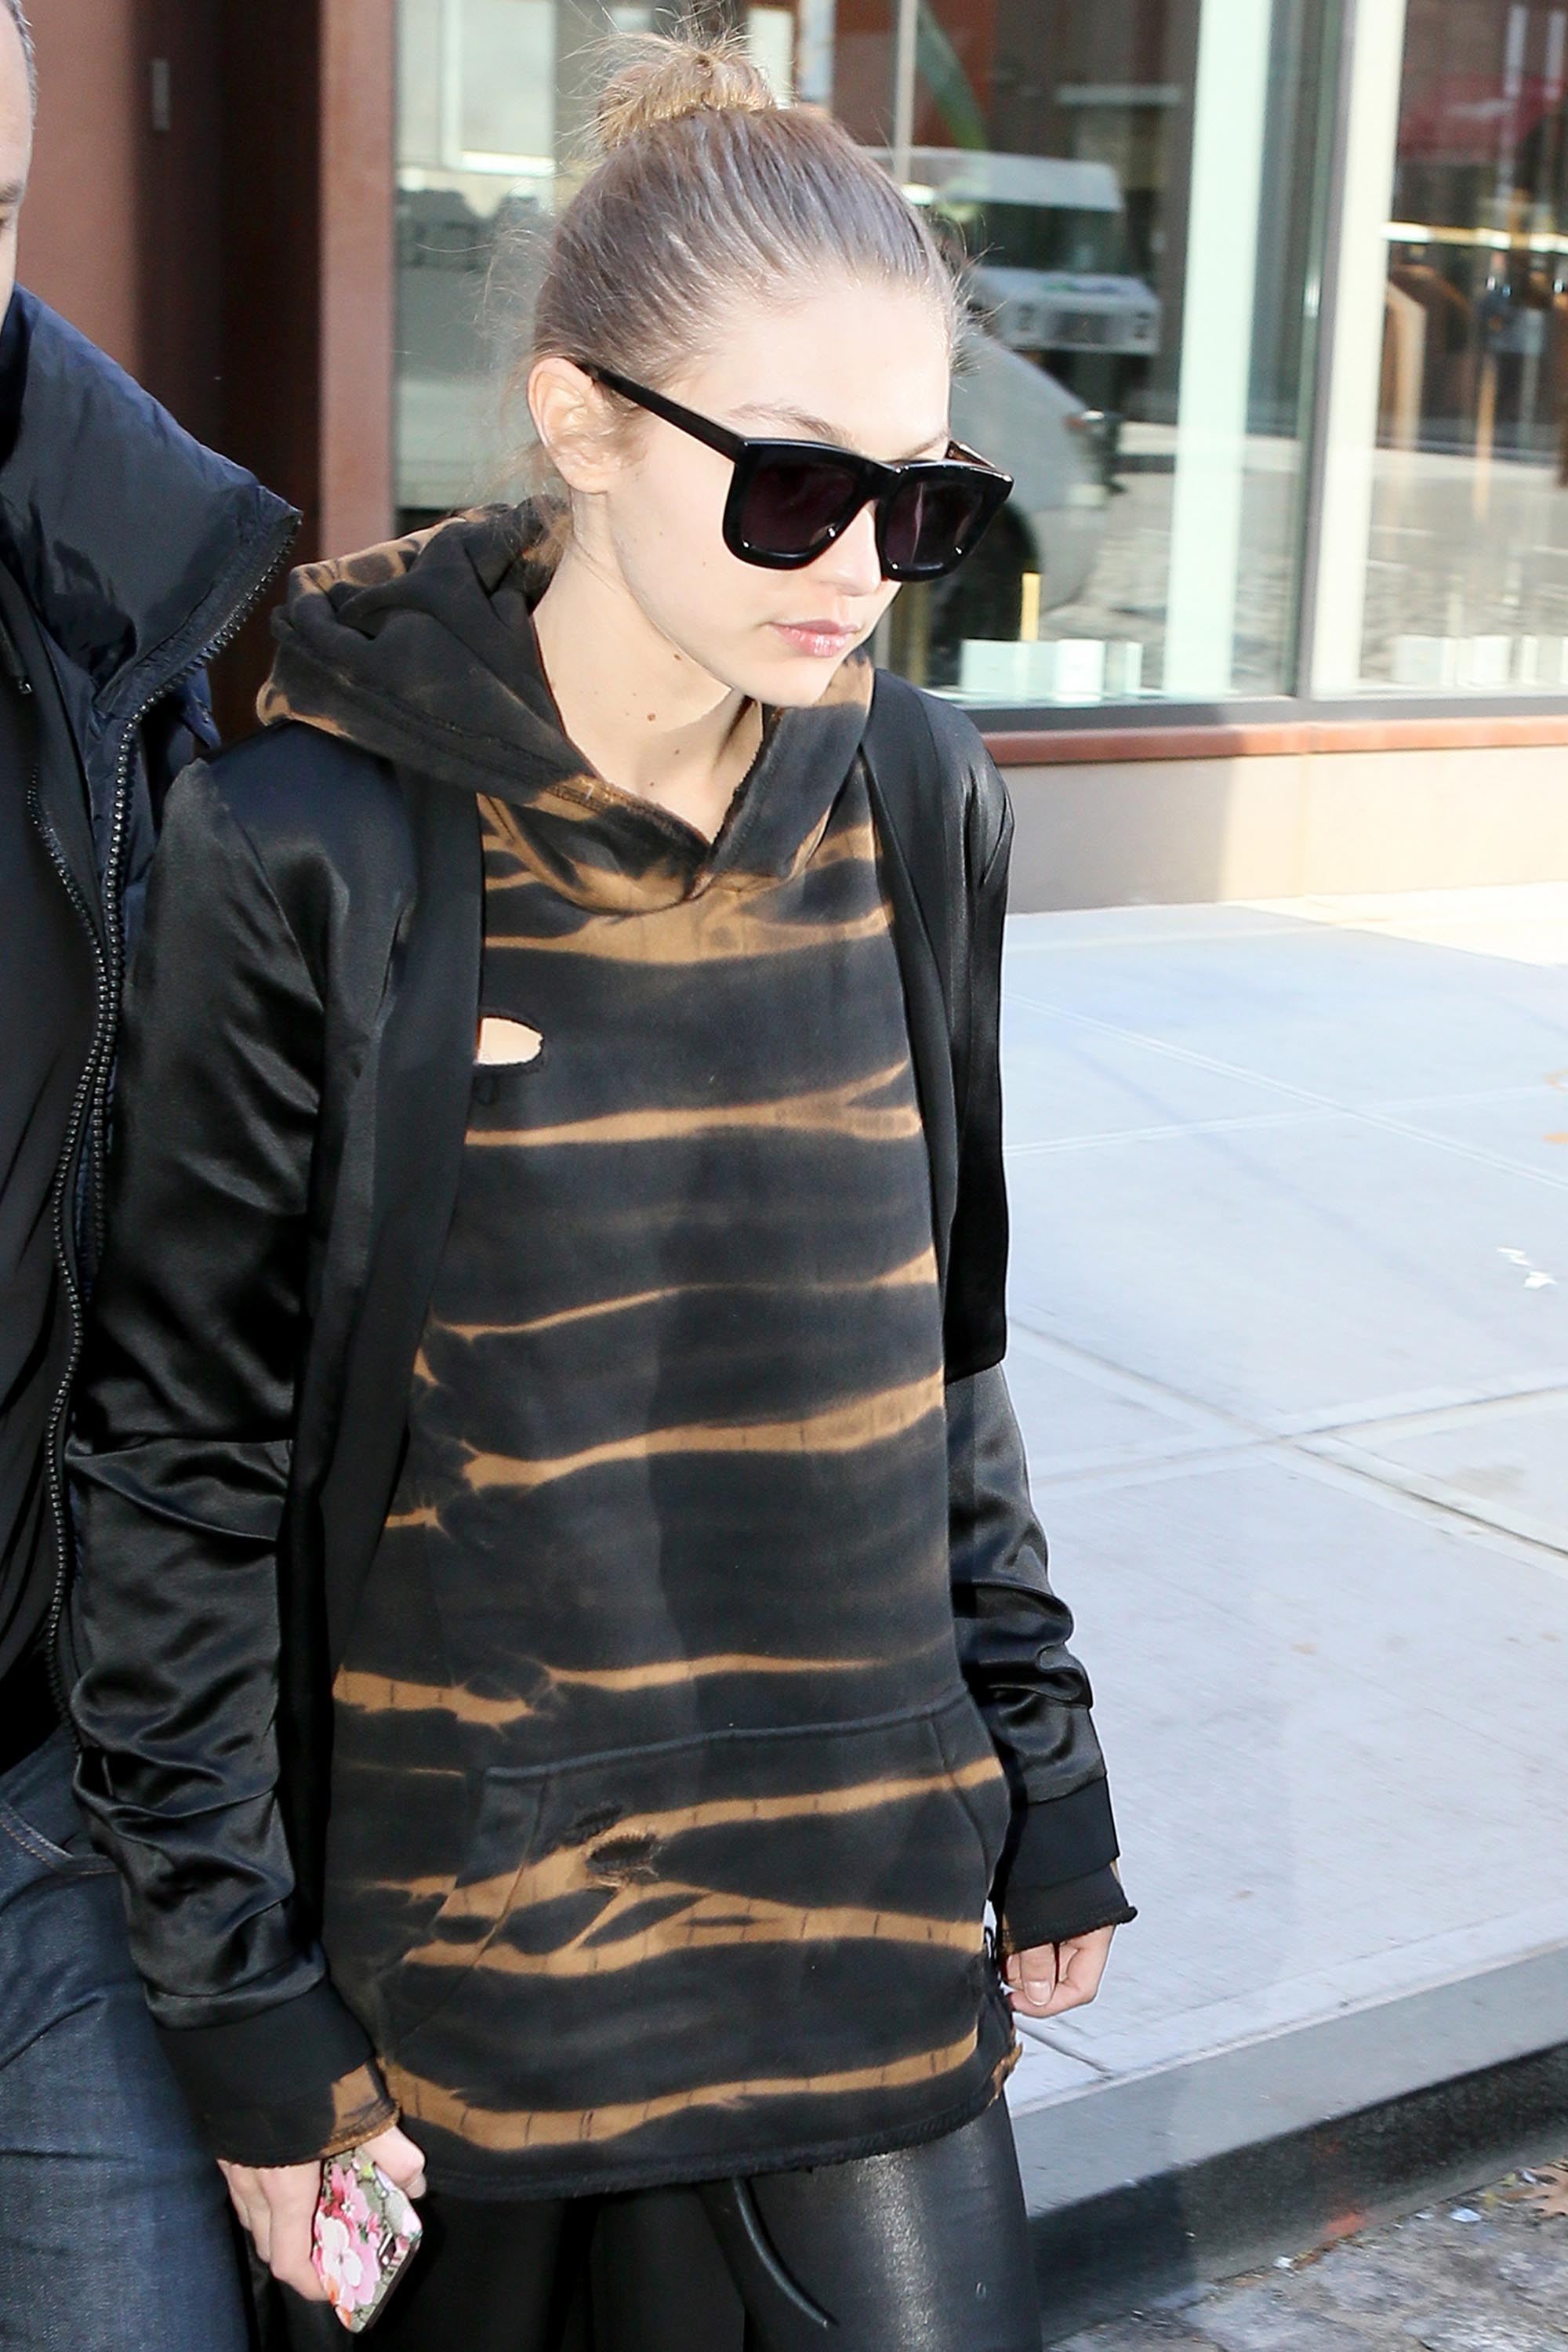 Gigi Hadid out & about in New York